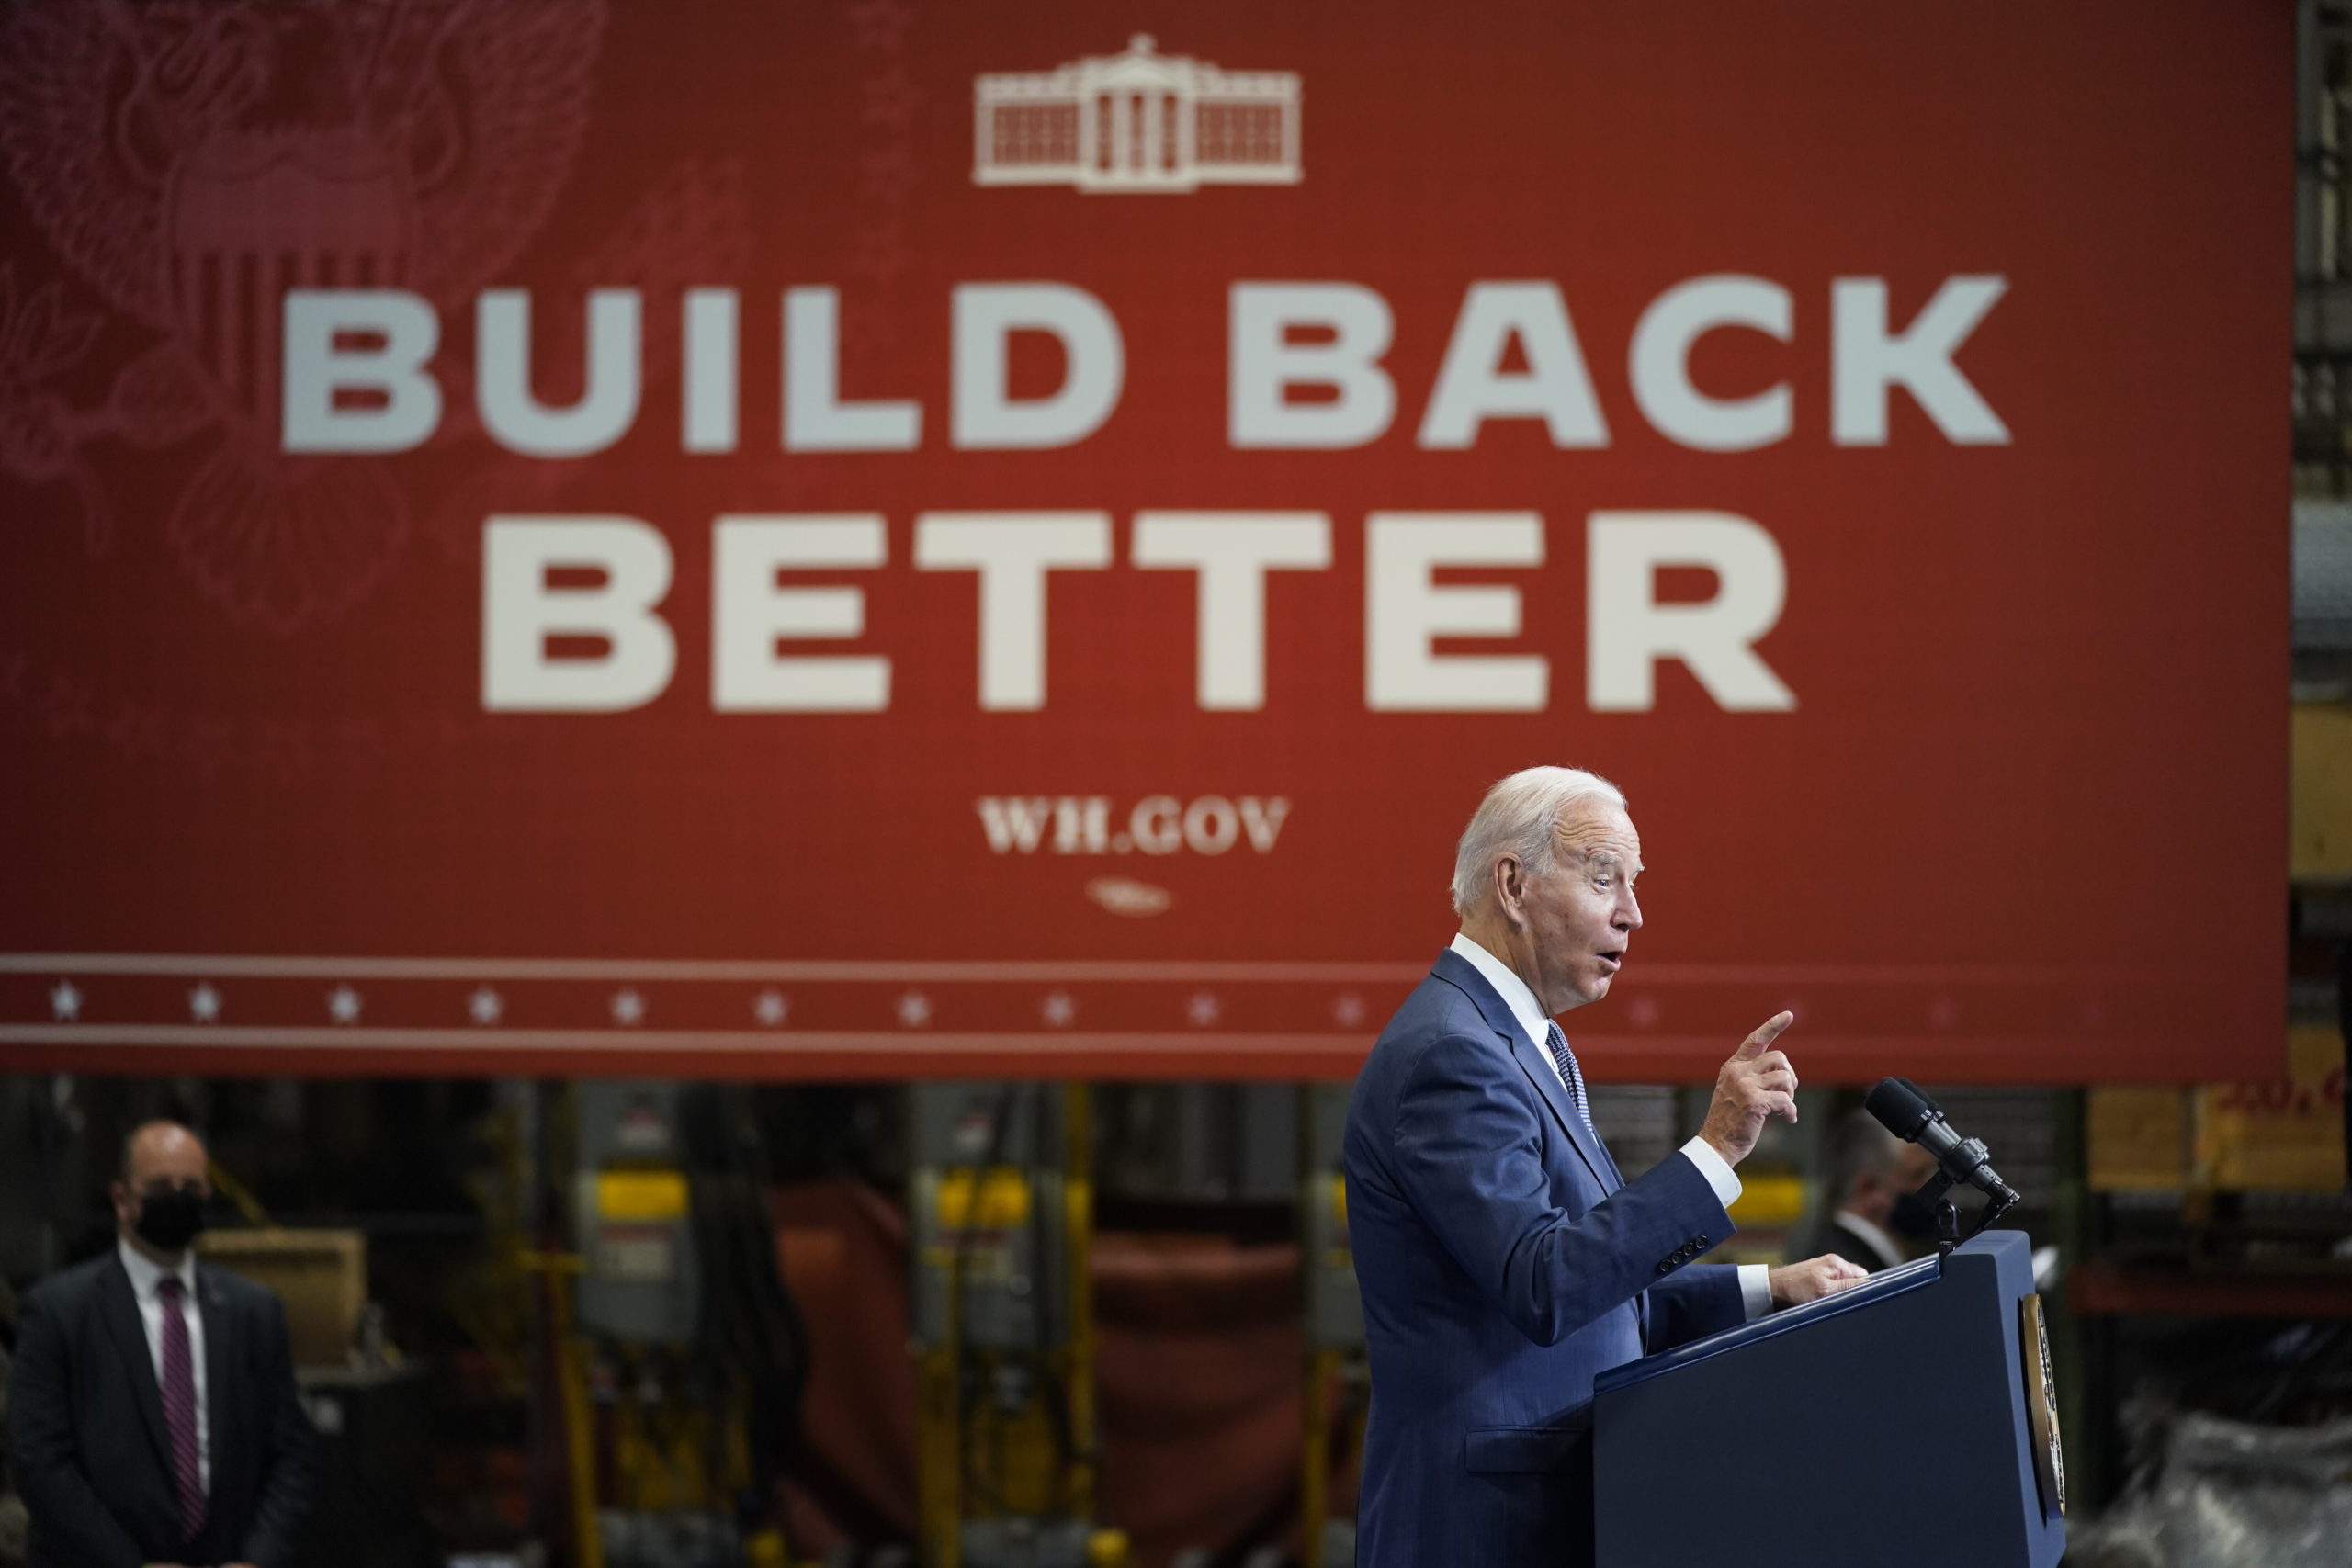 President Joe Biden delivers remarks at NJ Transit Meadowlands Maintenance Complex to promote his "Build Back Better" agenda in Kearny, N.J. When covering the economy, media should consider how policies like the BBB plan will personally impact families